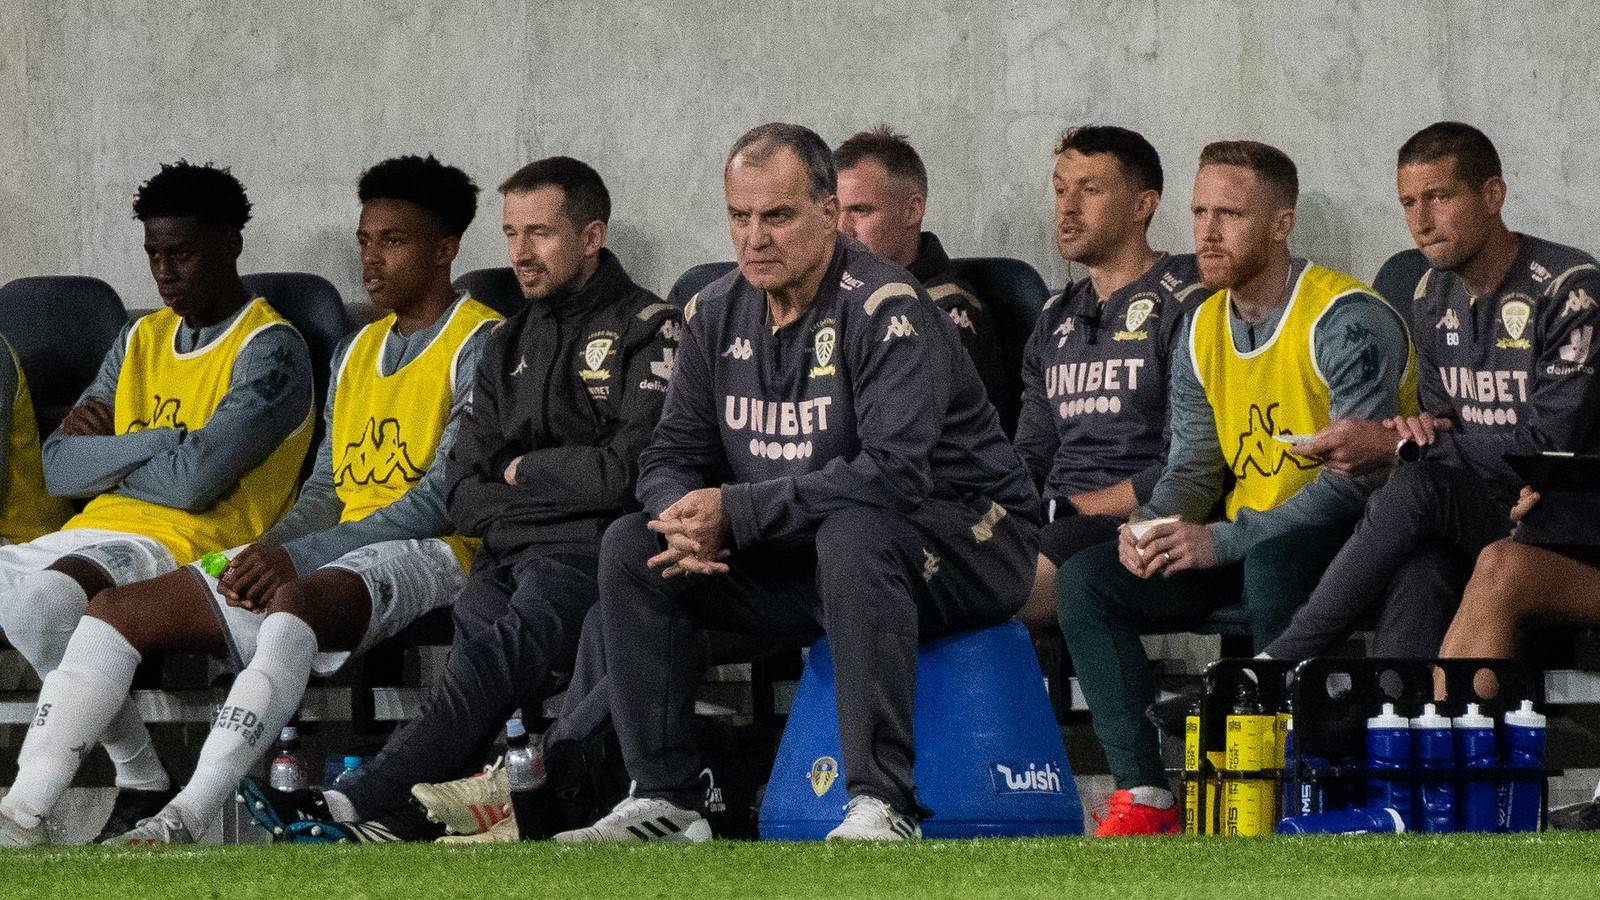 Bielsa 'would be a great fit for Australia', say ex-Socceroos - FTBL | The home of football in Australia